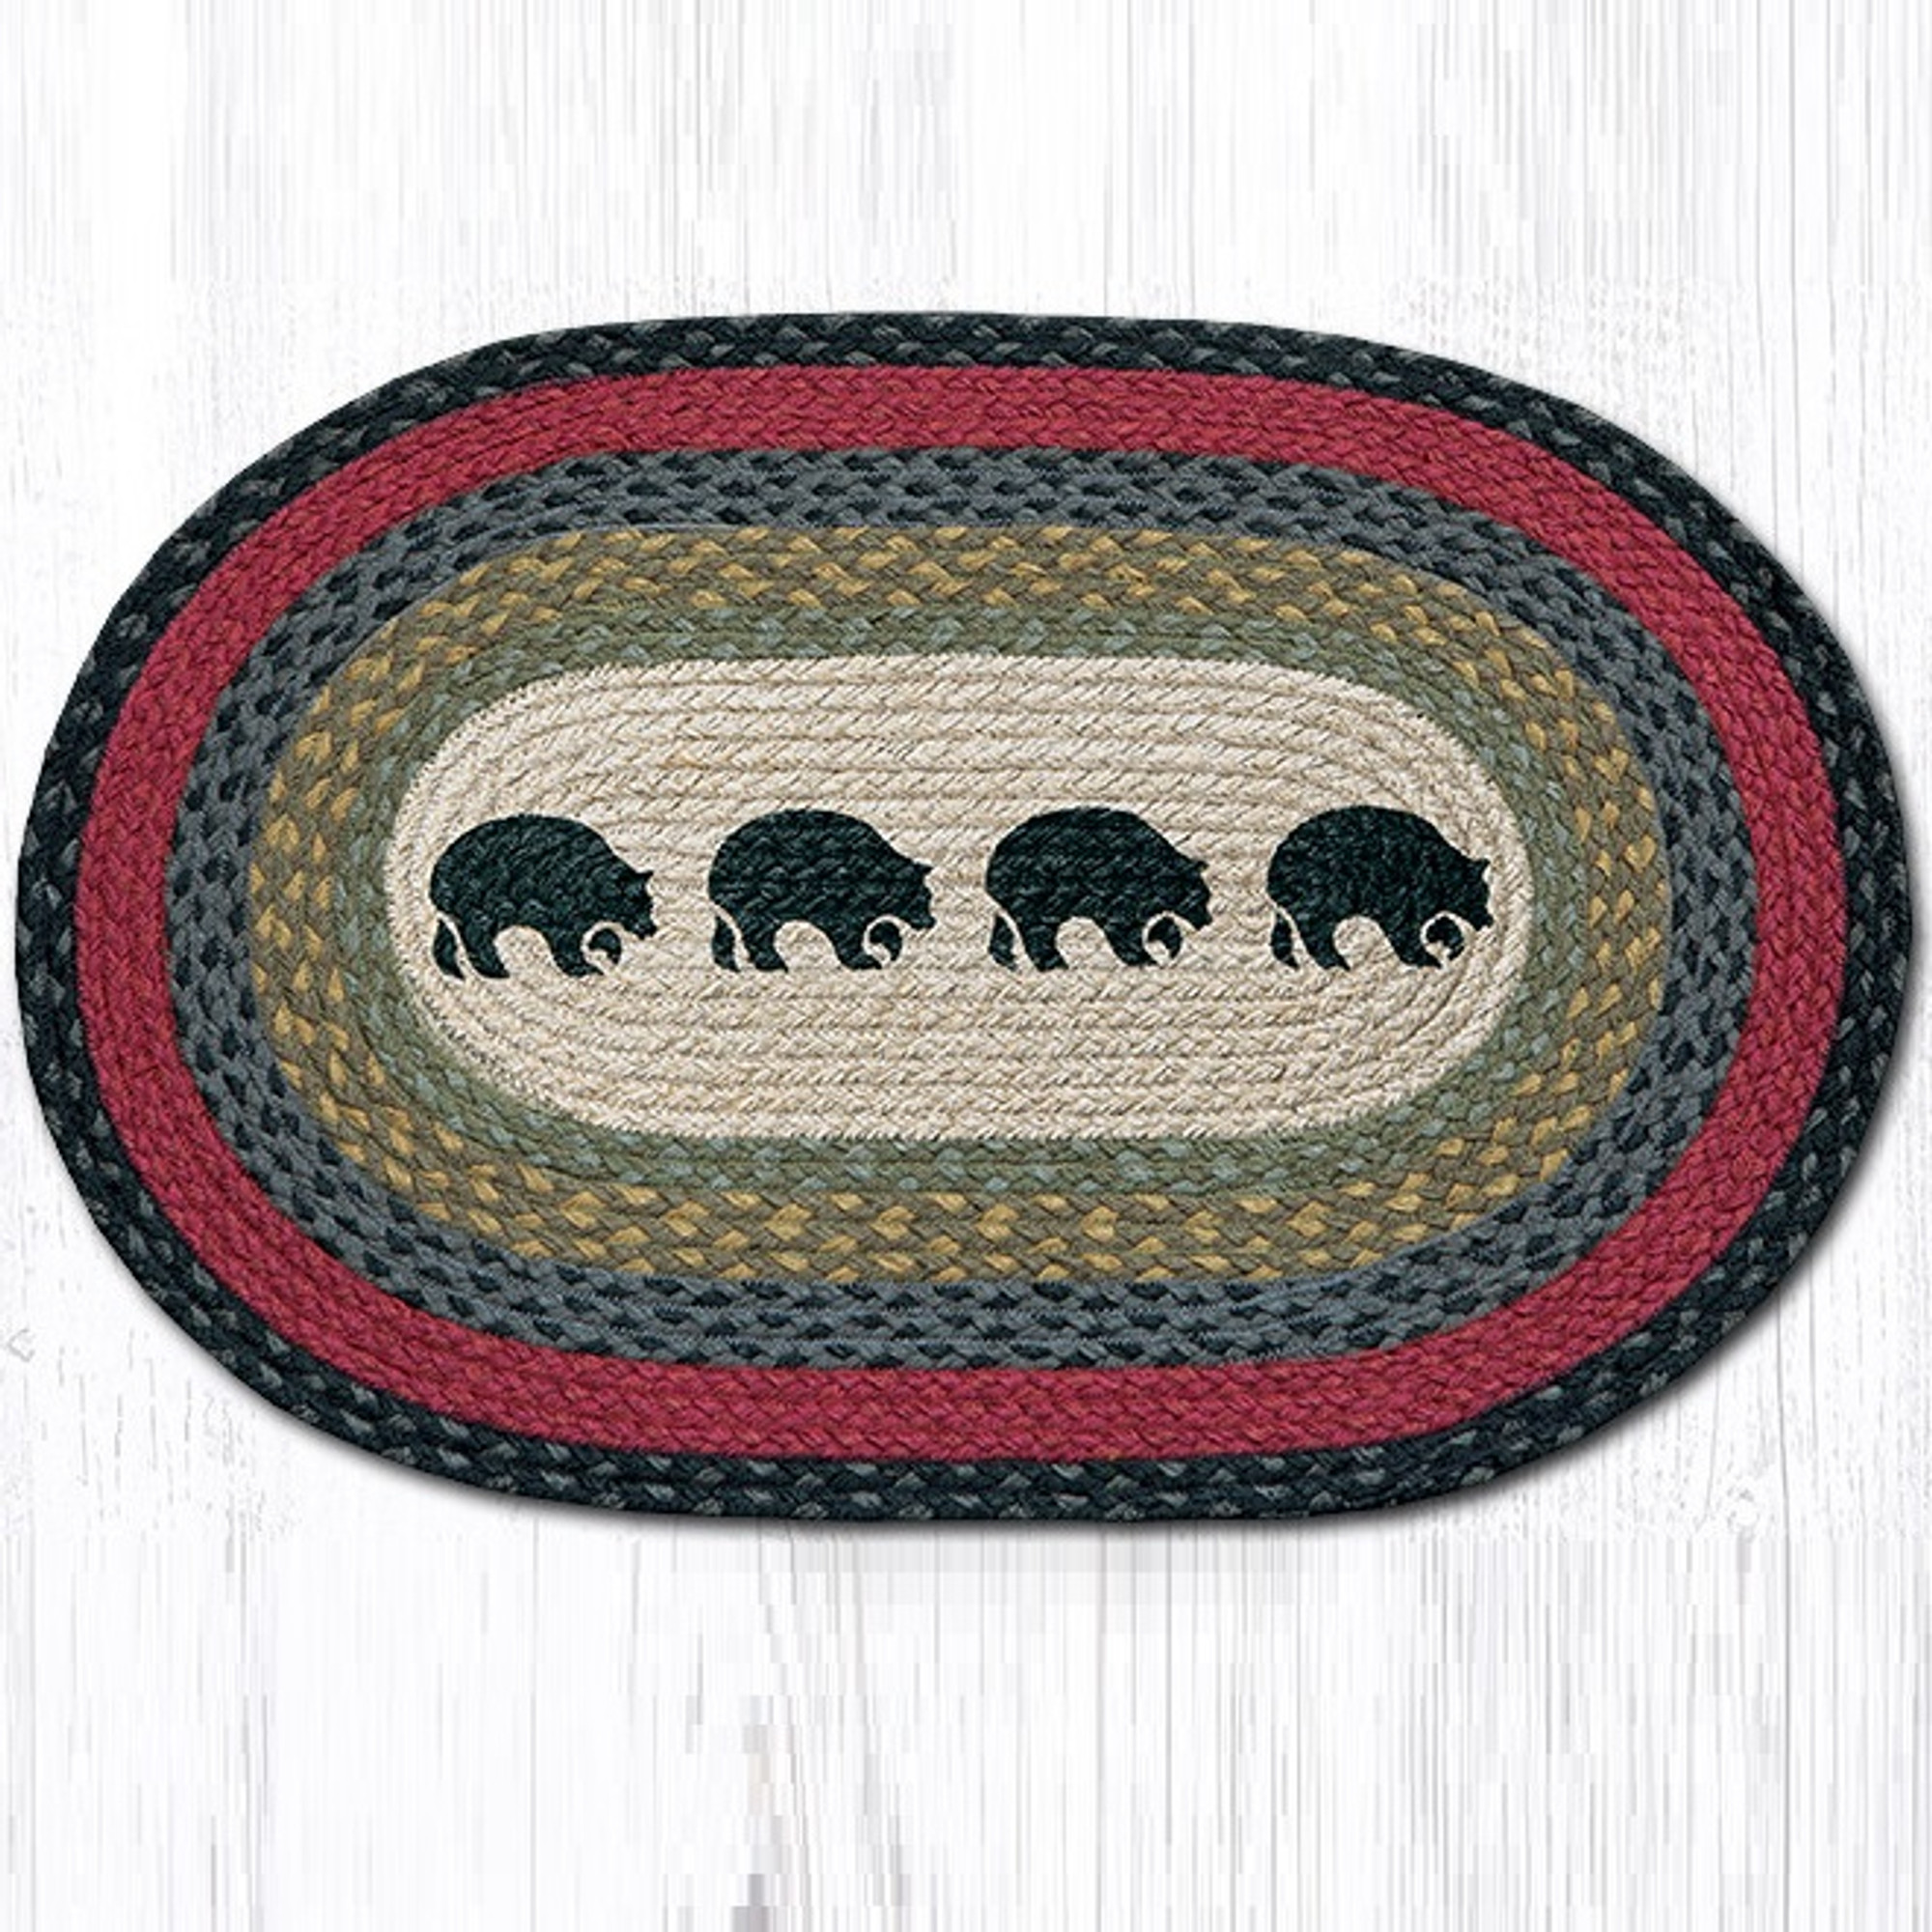 Braided Oval Rugs/Mats – Quilted Cabin